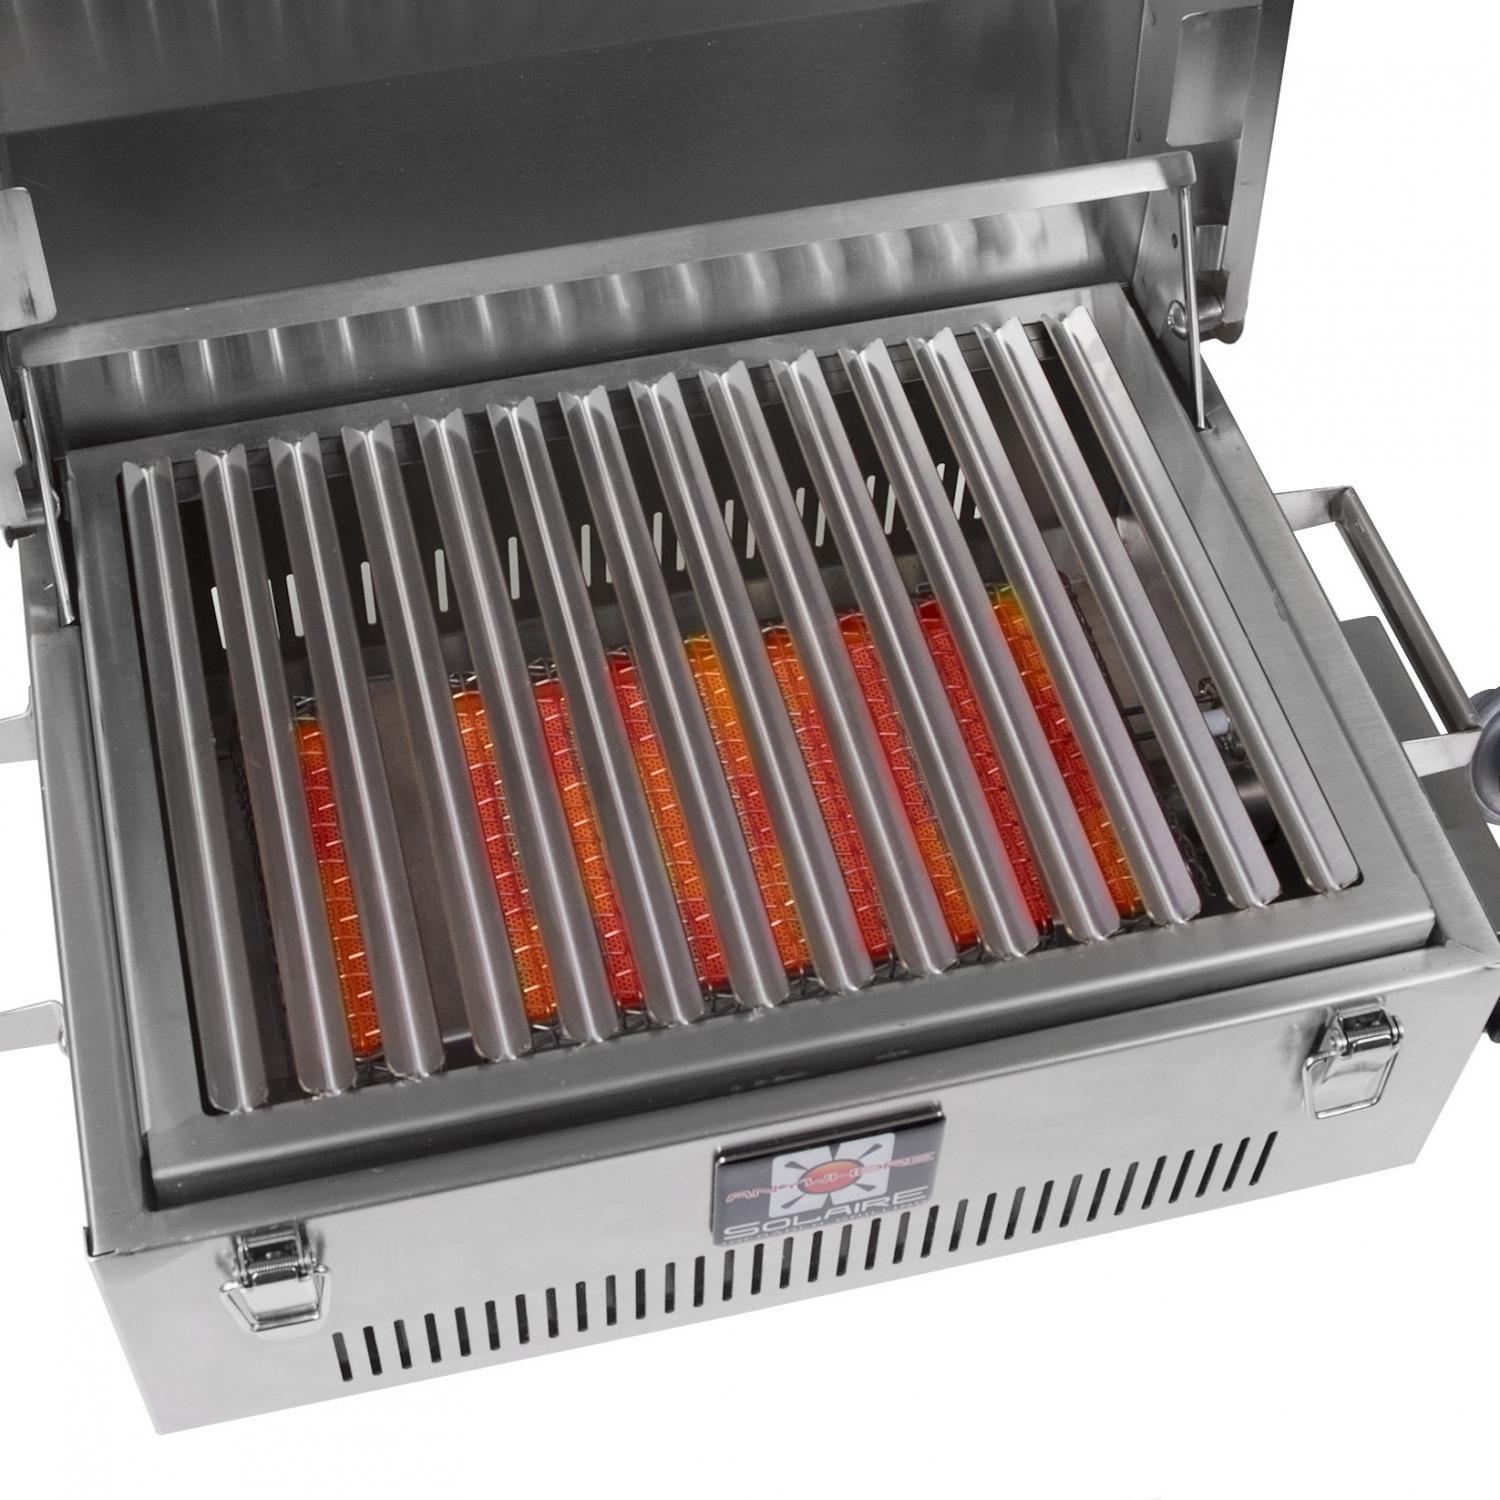 Solaire SOL-IR17BWR Portable Infrared Gas Grill With Free Carrying Bag & Warming Rack, Stainless Steel - image 2 of 6